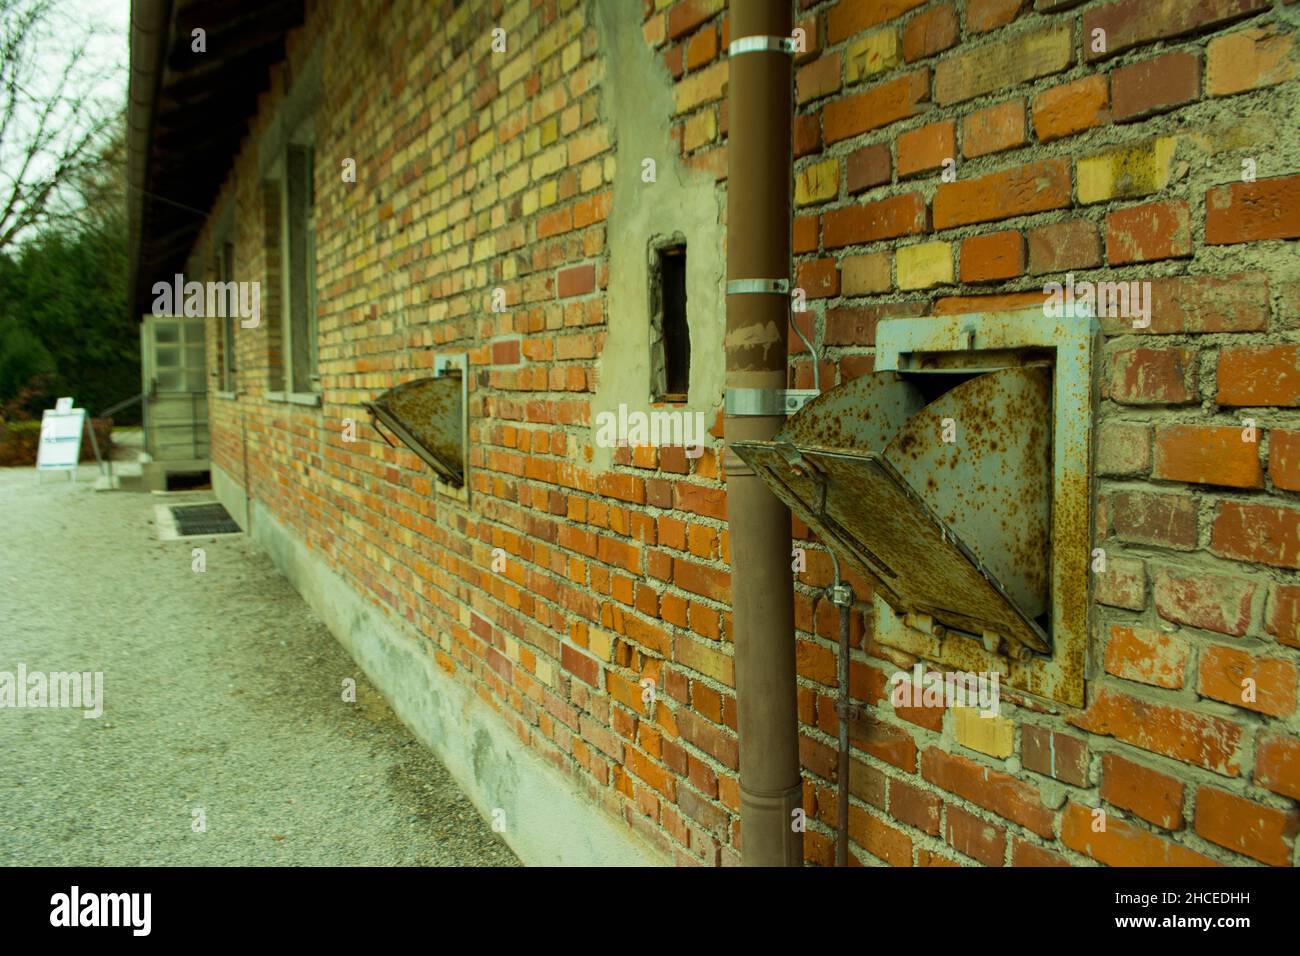 The exhaust of gas chamber in Crematorium, Nazi concentration camp, Dachau, Germany Stock Photo